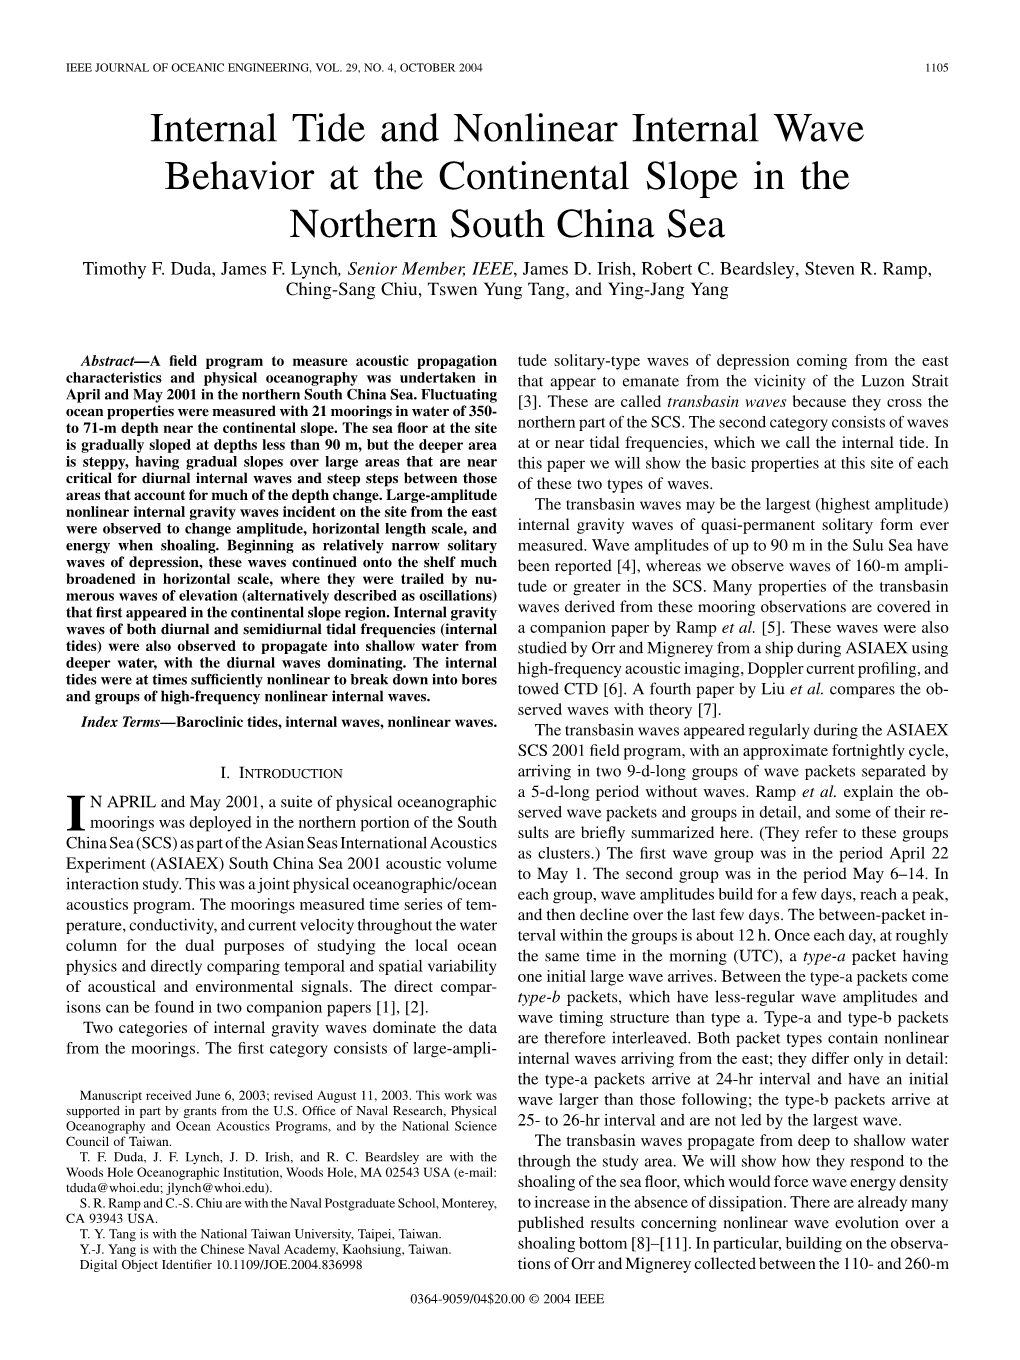 Internal Tide and Nonlinear Internal Wave Behavior at the Continental Slope in the Northern South China Sea Timothy F